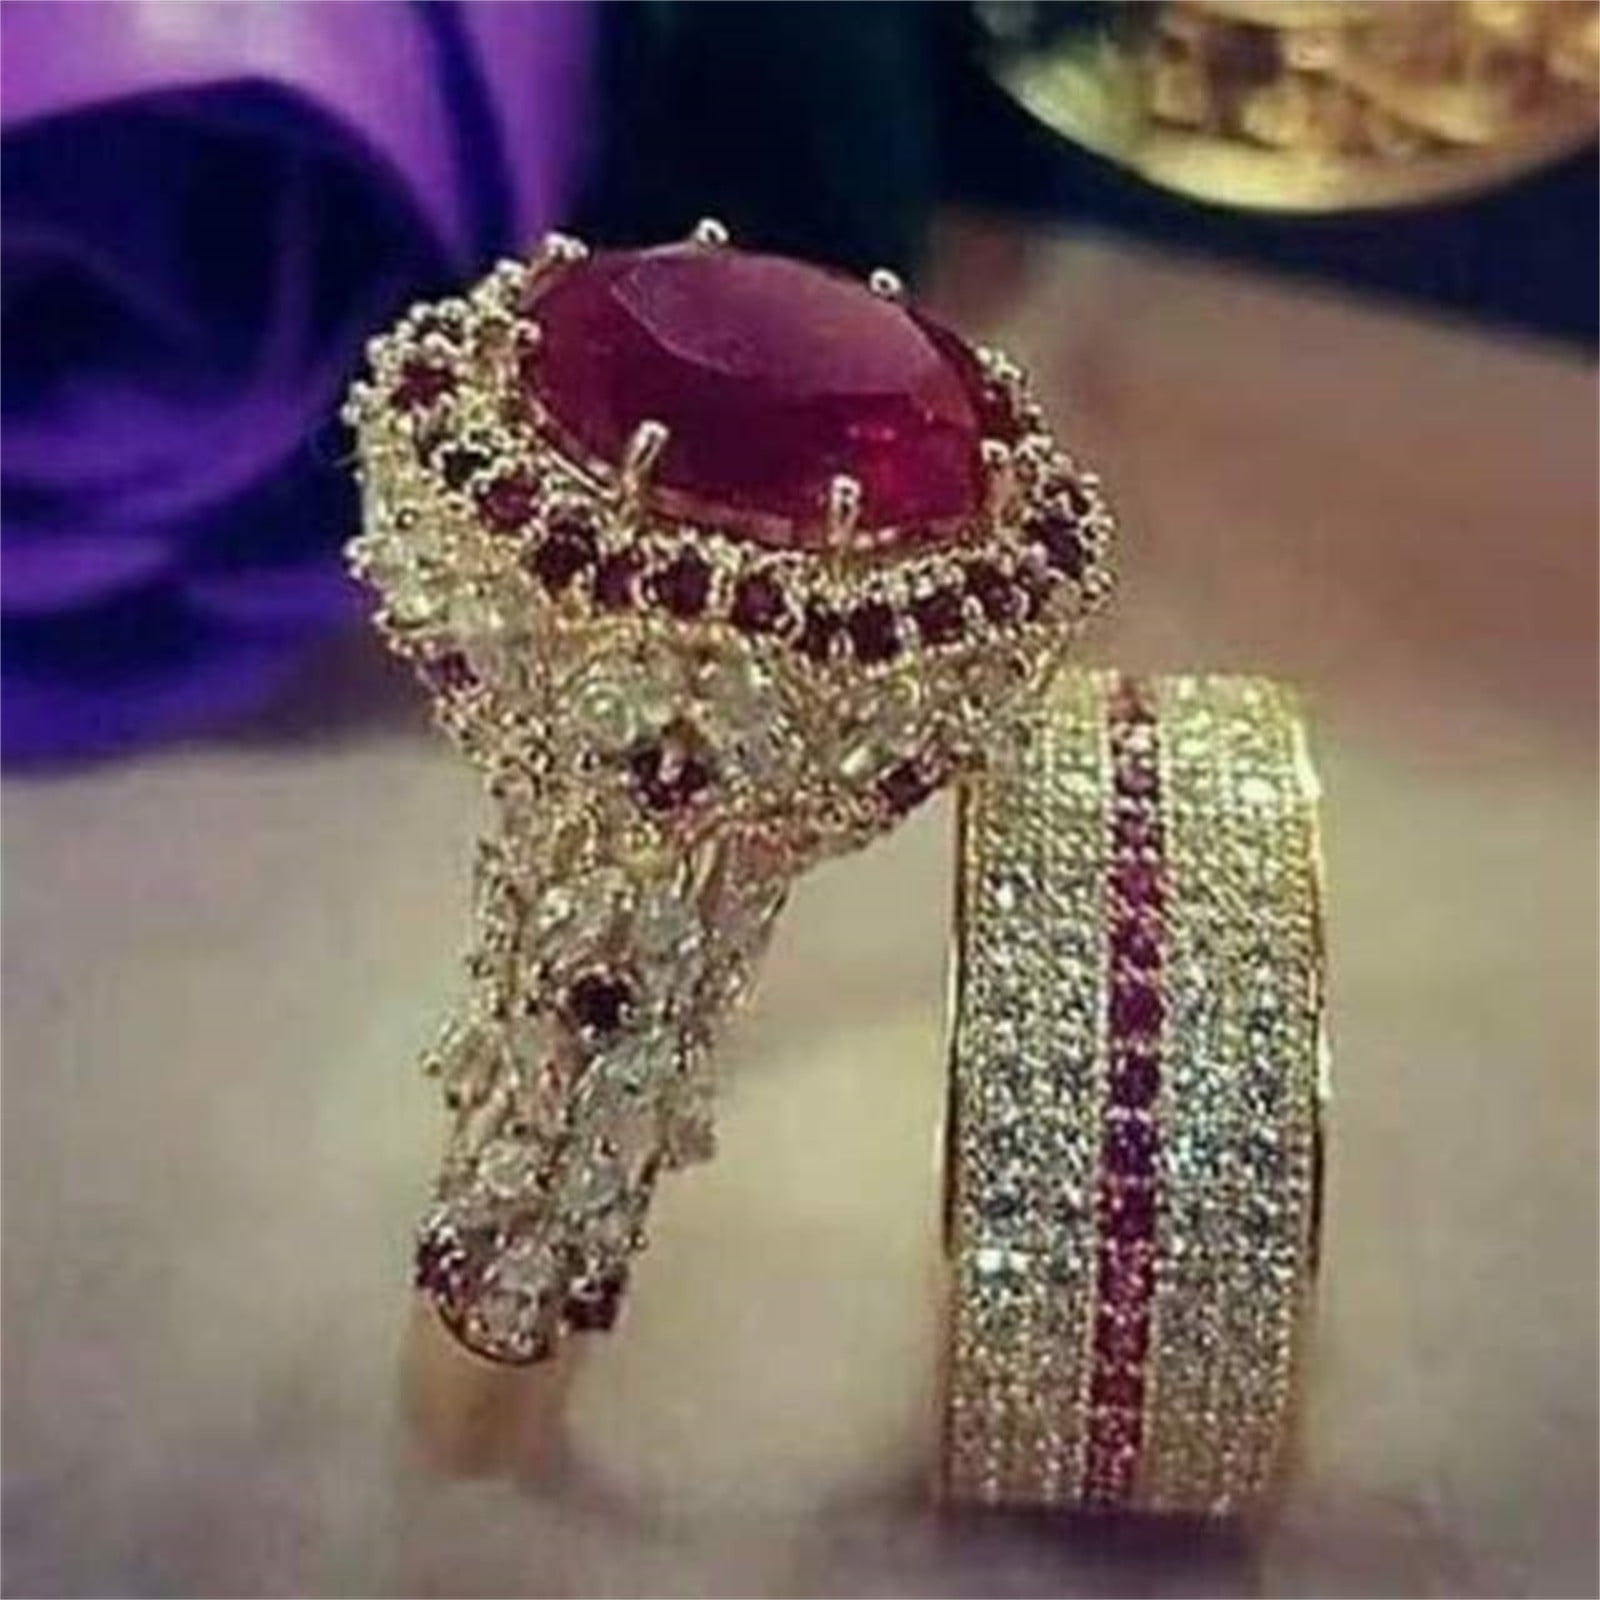 gold rings | Bridal gold jewellery designs, Gold jewellry designs, Gold  bridal jewellery sets